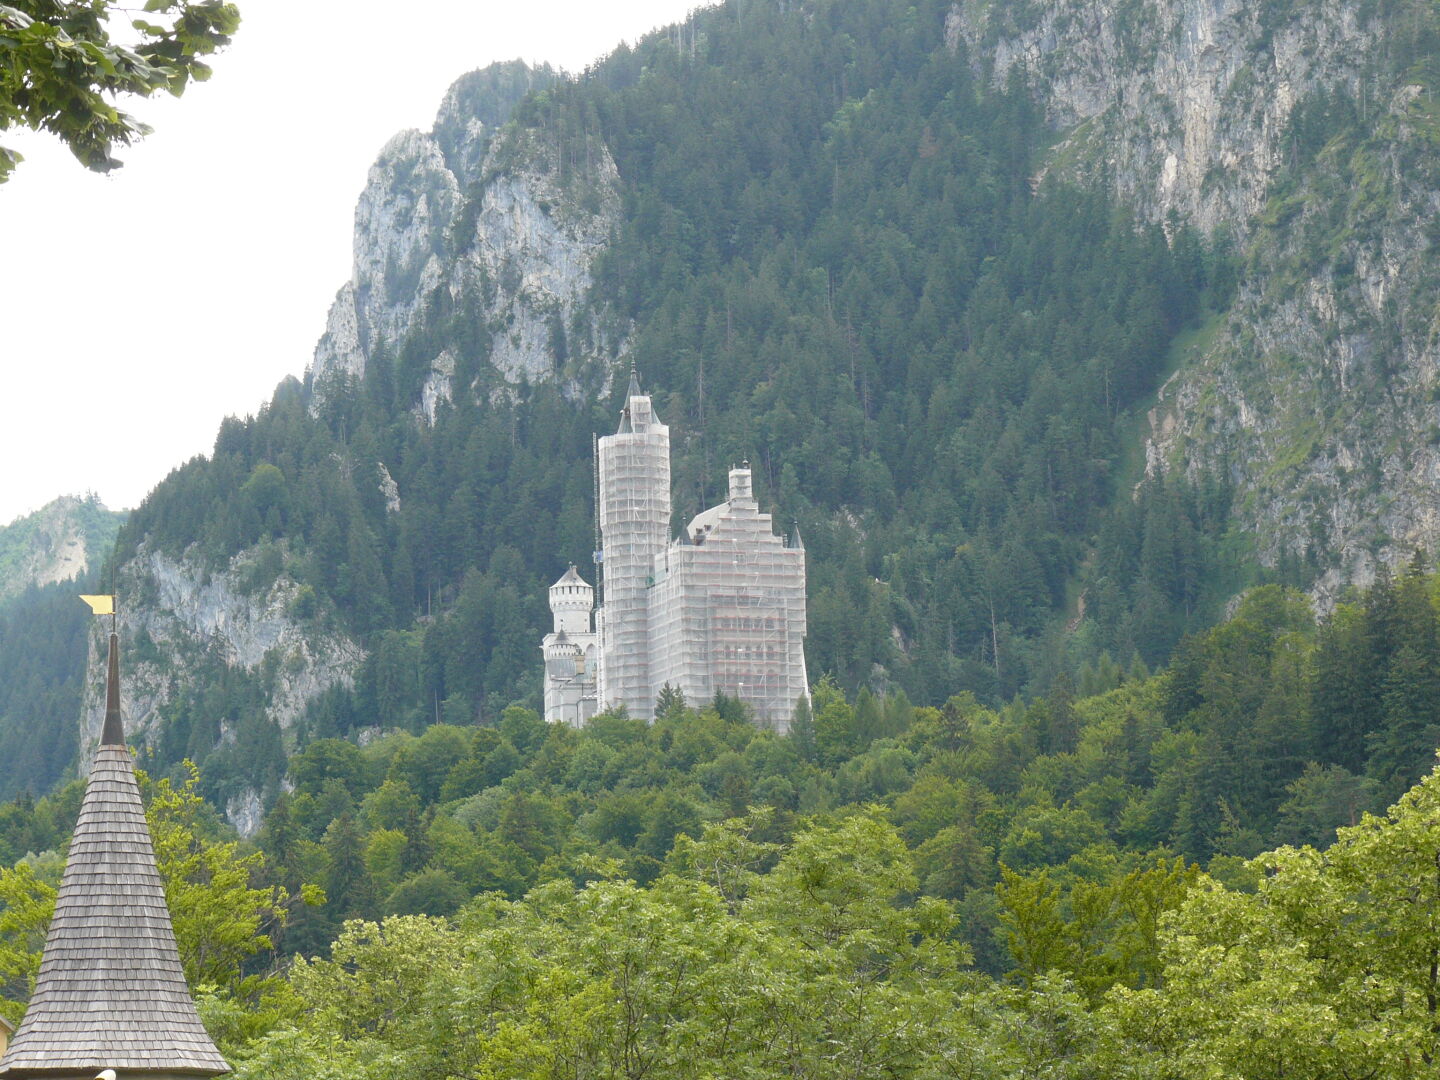 First view of Castle Neuschwanstein in the distance. Apparently the western (my) side is under construction.